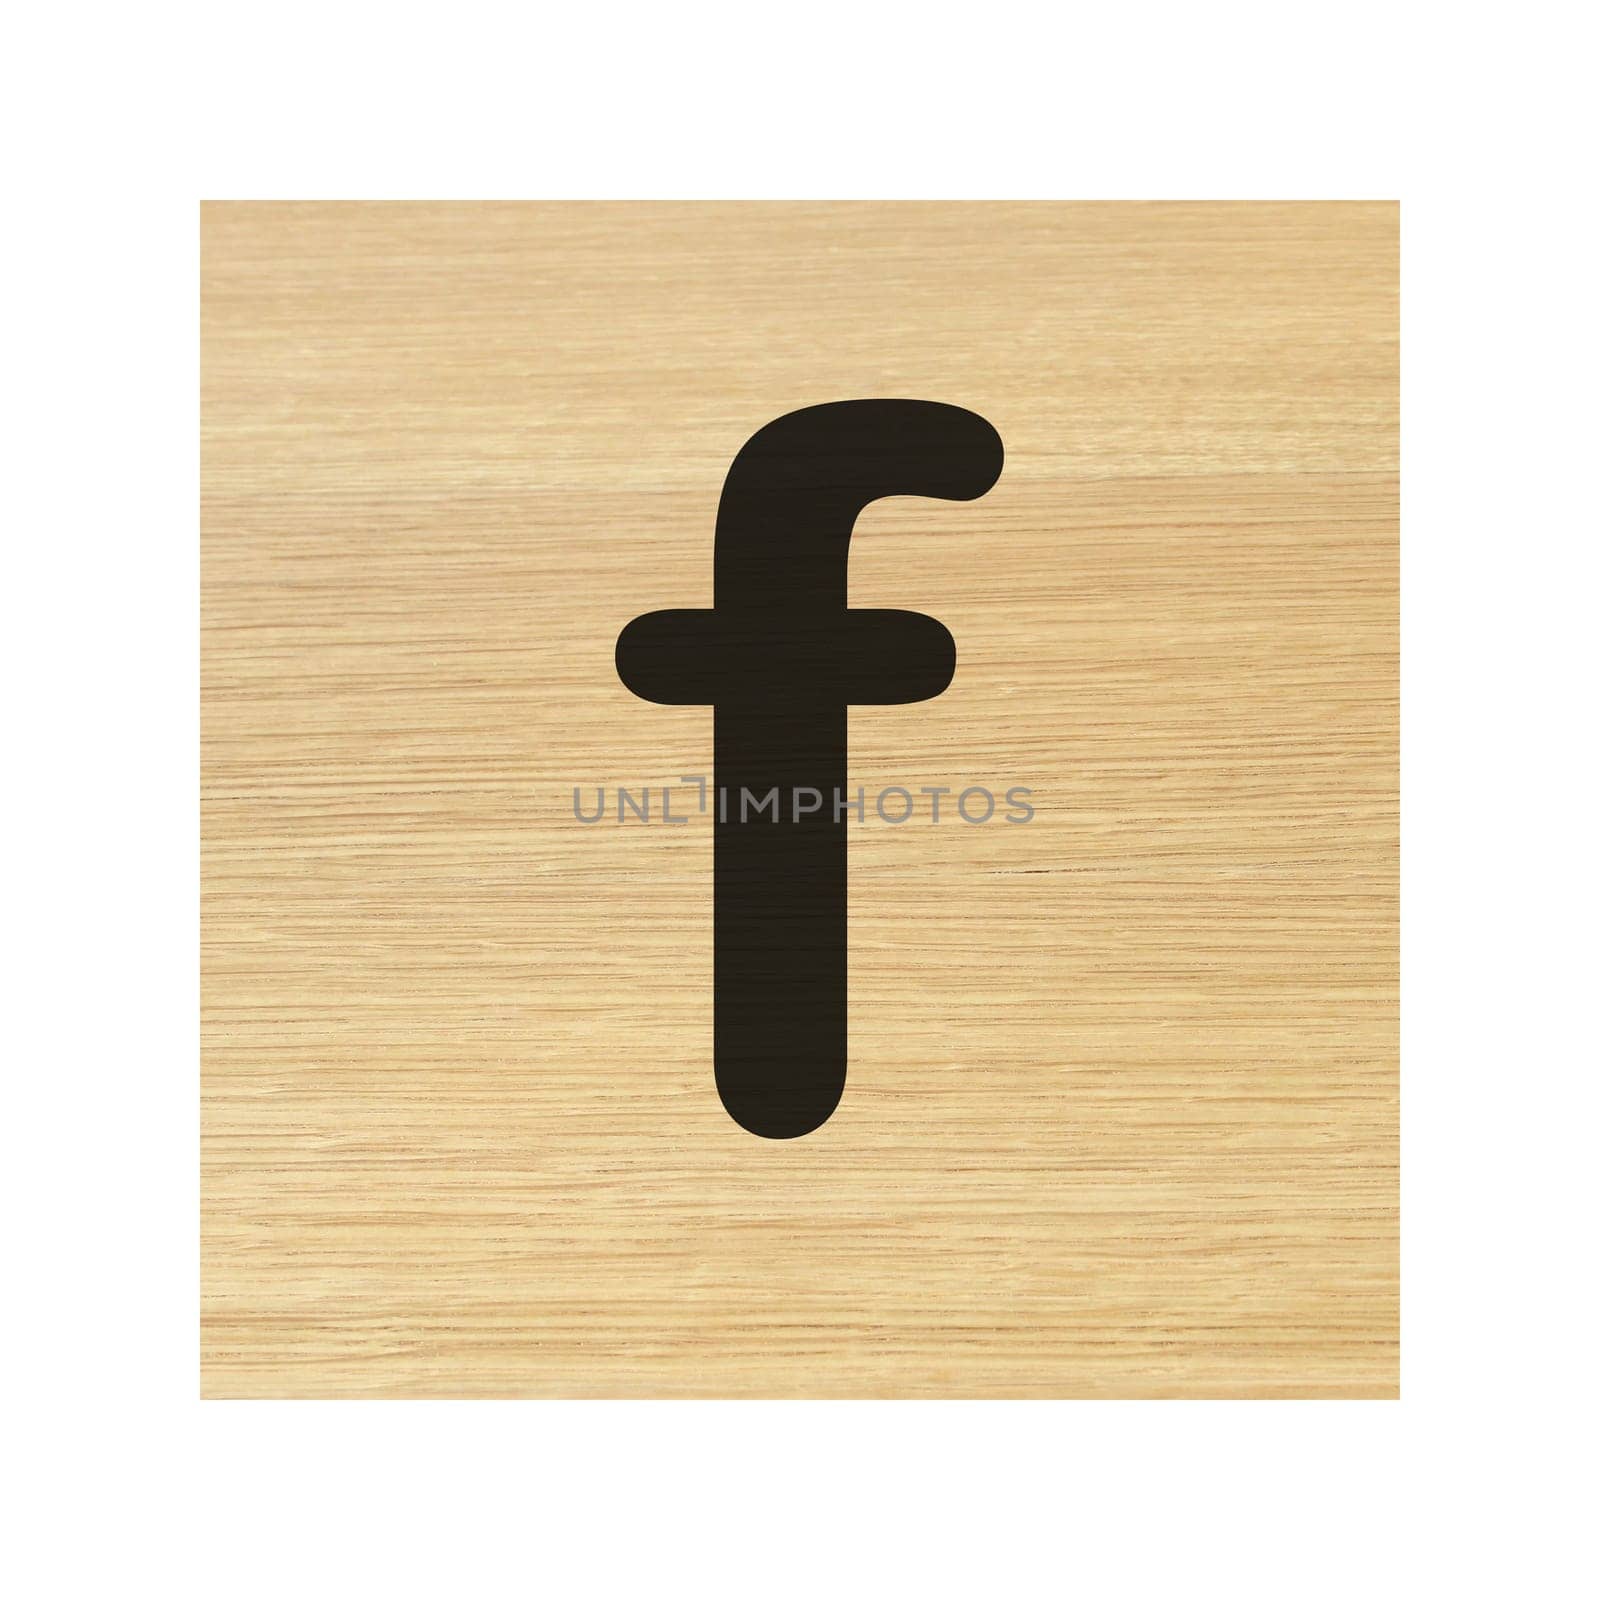 A lower case f wood block on white with clipping path